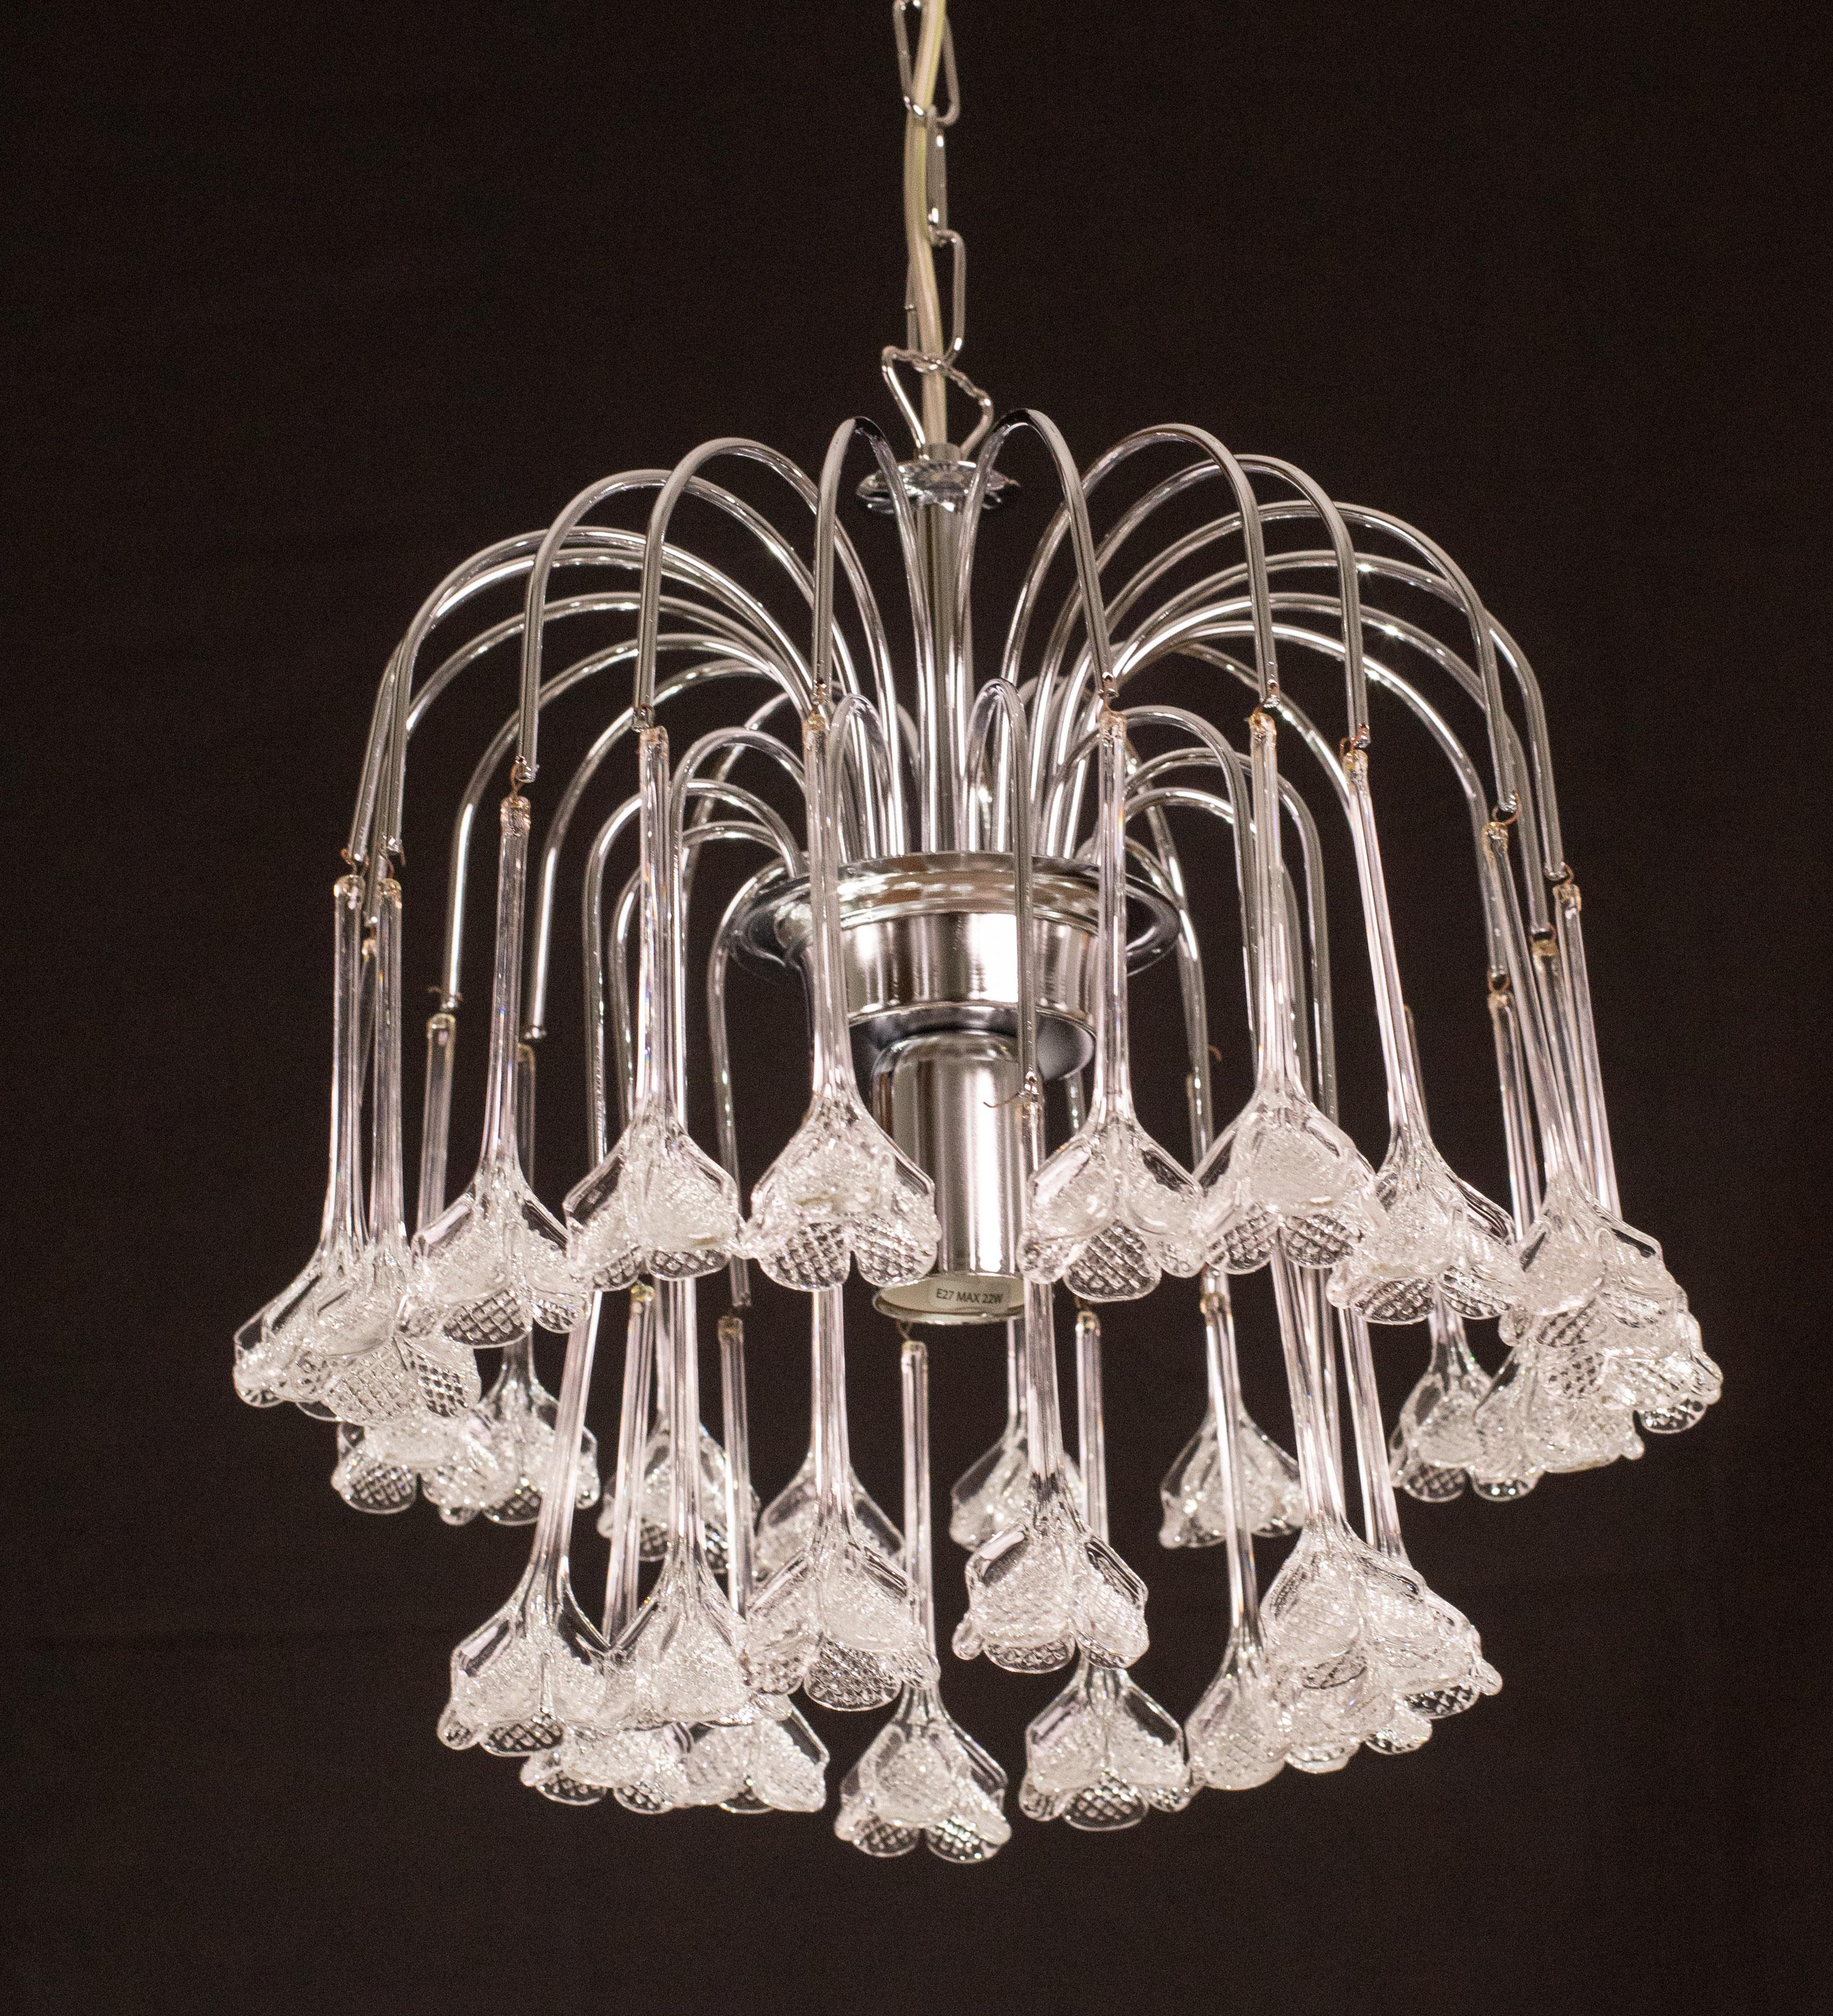 Murano chandelier with white flowers in Hollywood Regency style. This beautiful luxury Murano glass chandelier is a design in the style of Paolo Venini. With its romantic glass flowers, it is truly a joy to behold. The chandelier consists of two